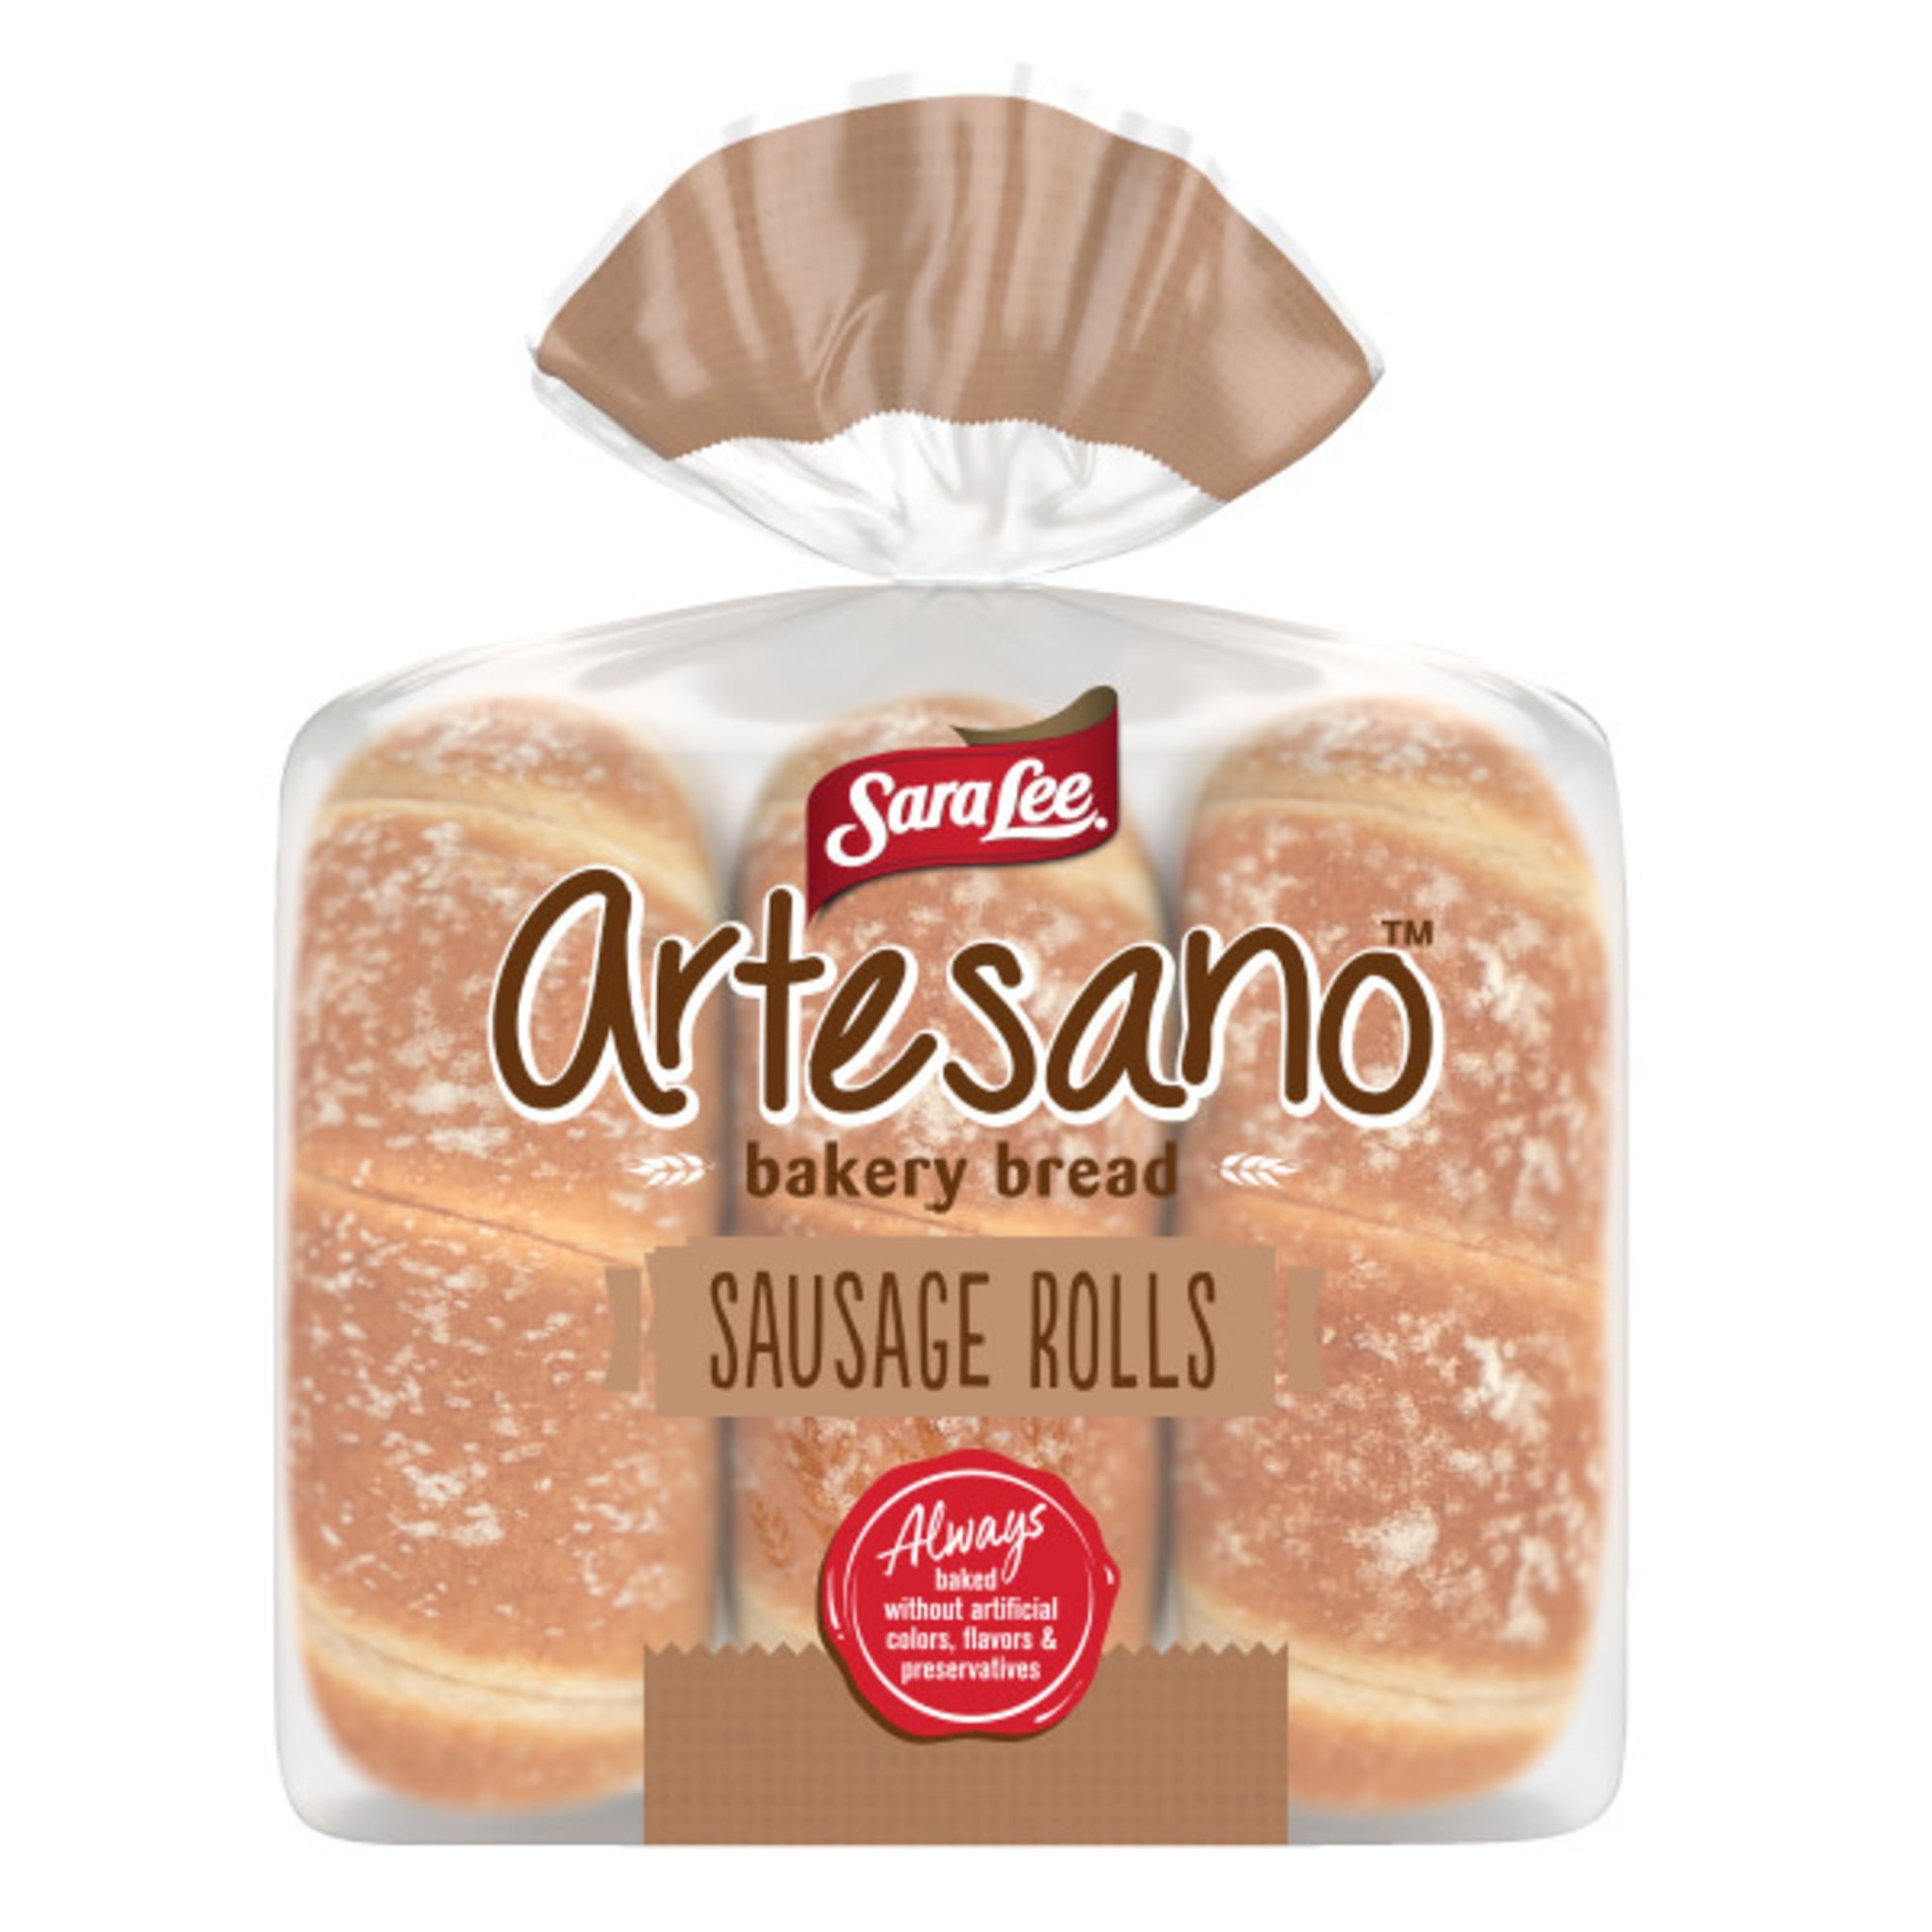 Sara Lee Artesano Bakery Sausage Rolls, No High Fructose Corn Syrup, 6  Rolls, 15 Ounce Pack 